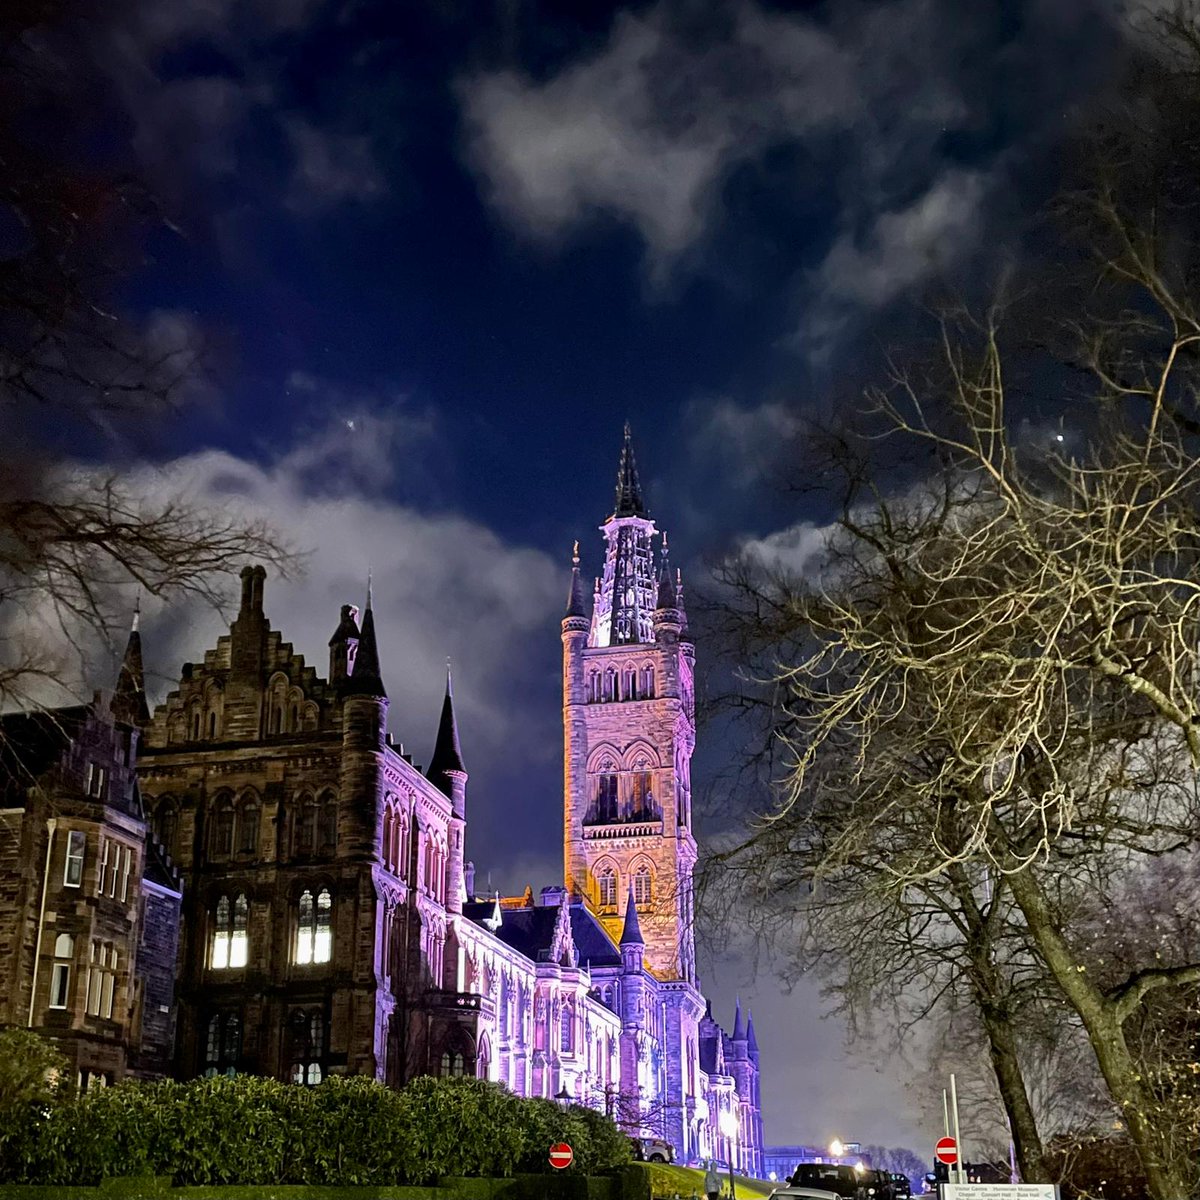 From 25 Nov, our tower will be lit purple as we mark the @UN's 16 Days of Activism against Gender-Based Violence 💜 To coincide with #16Days, we are launching a new campaign, ‘Together Against Gender-Based Violence’ with @glasgowunisrc. Events: gla.ac/3SP8vQB